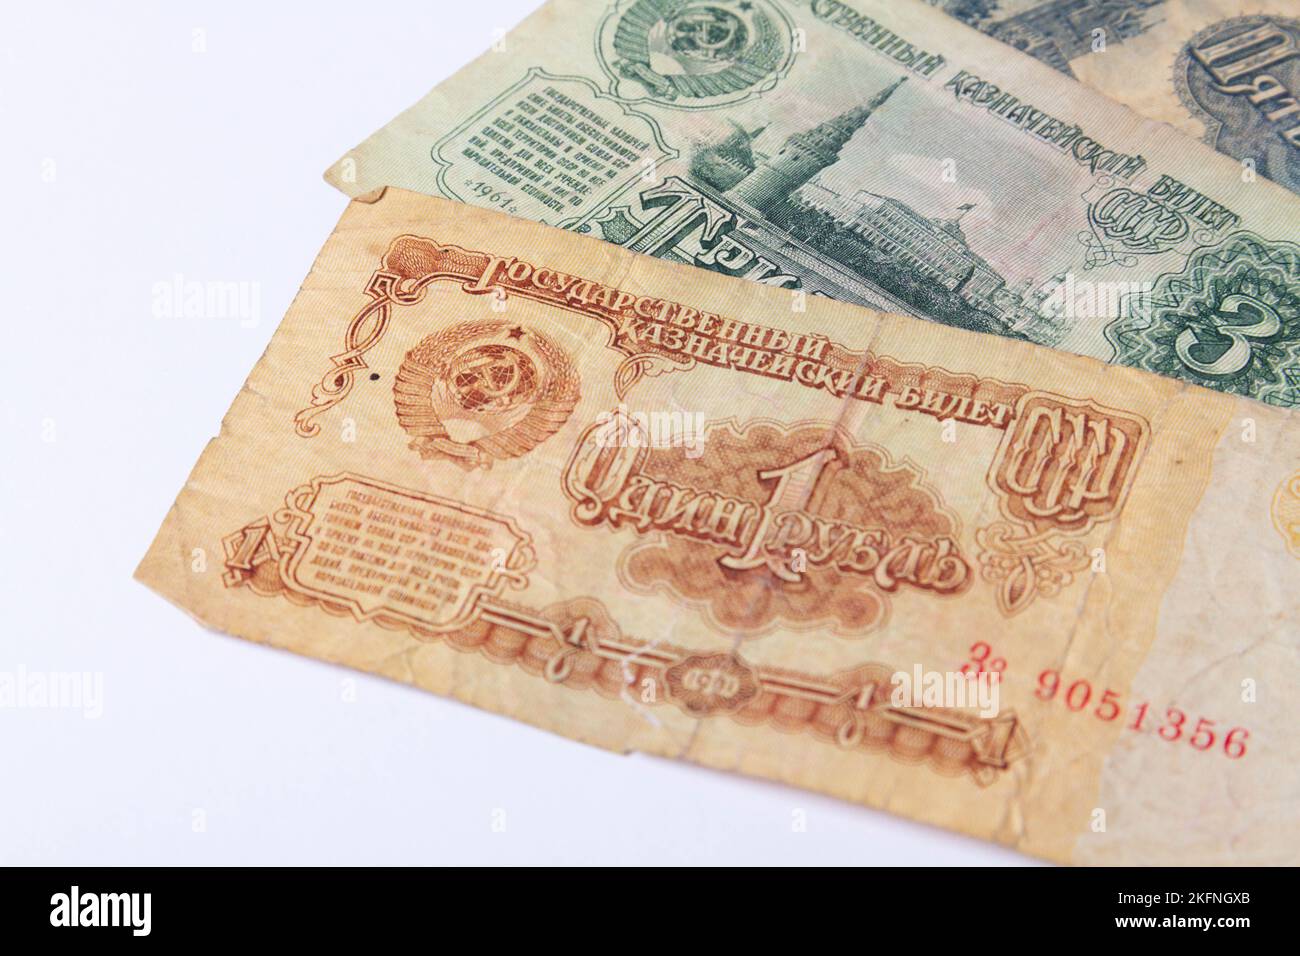 Soviet money. Old banknotes of Russia. Money fund. Treasury note backed by gold. Lenin on money. Payment in rubles. Stock Photo